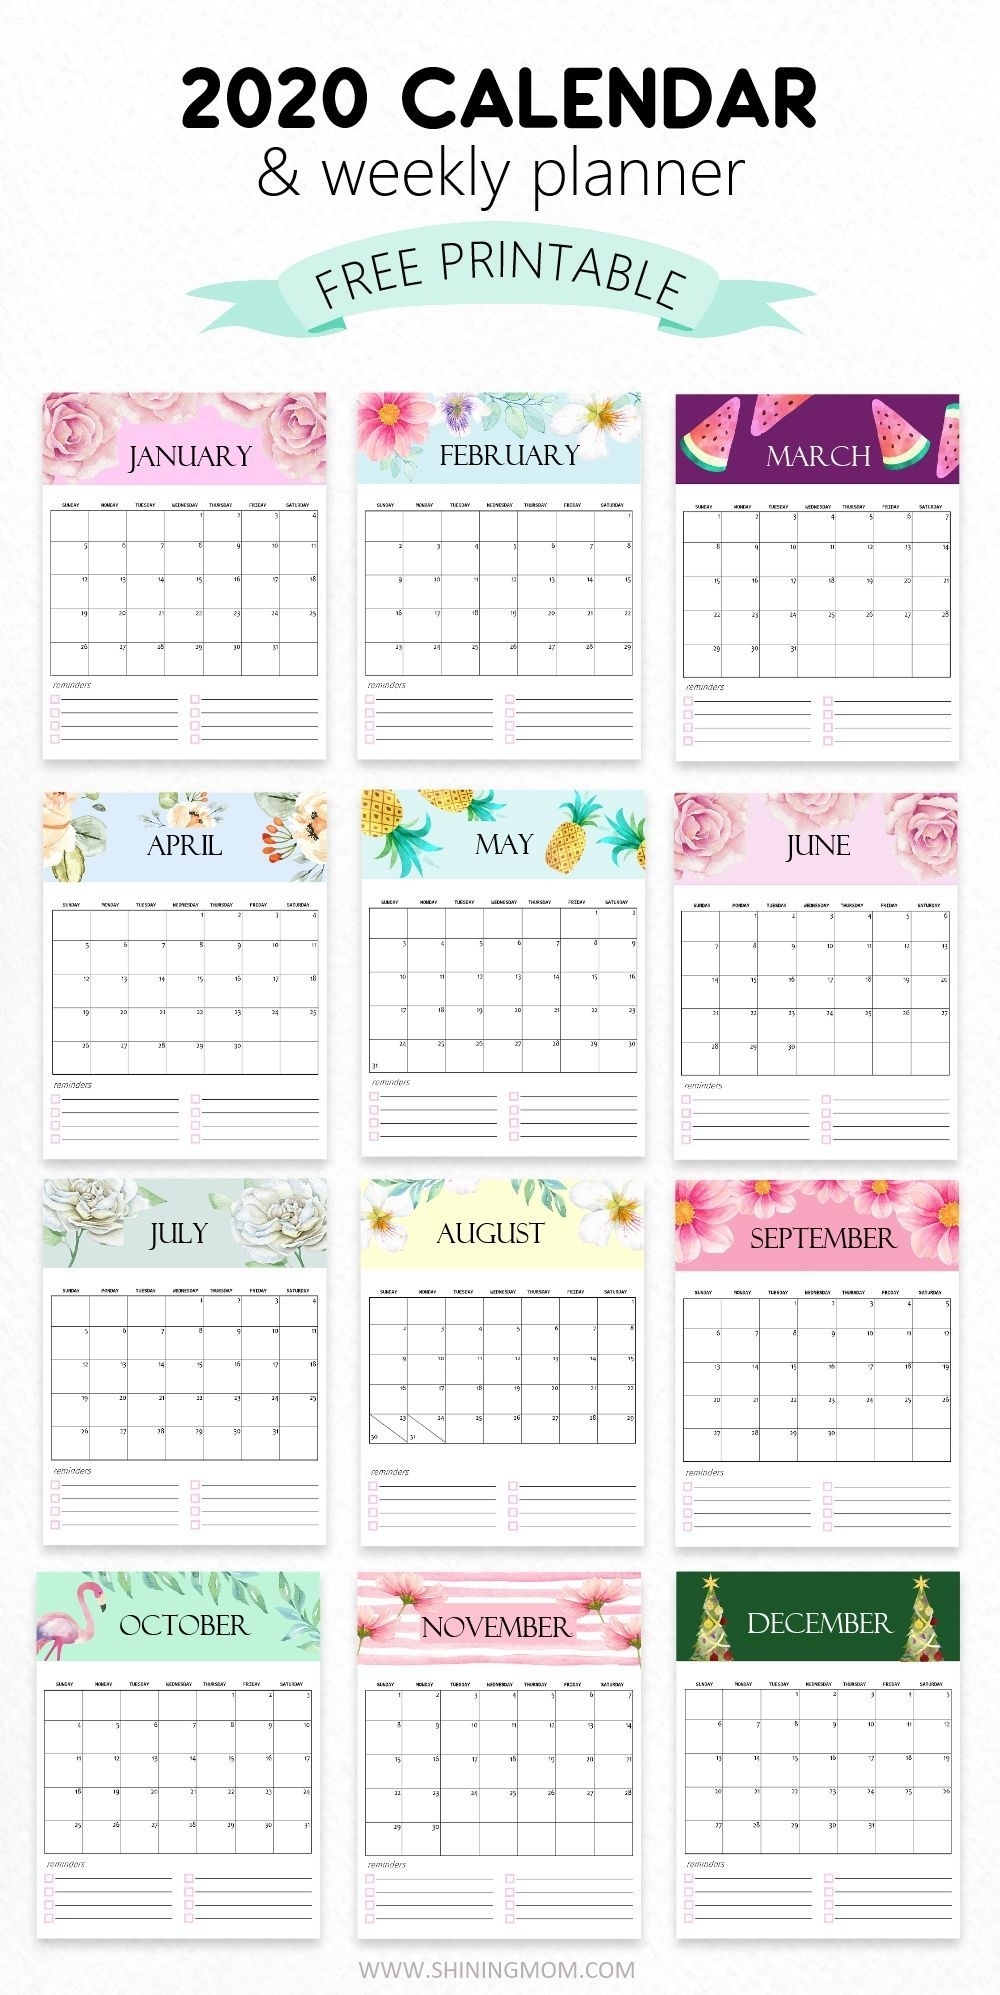 Pin By Leslie On Free Templates | Calendars | Monthly